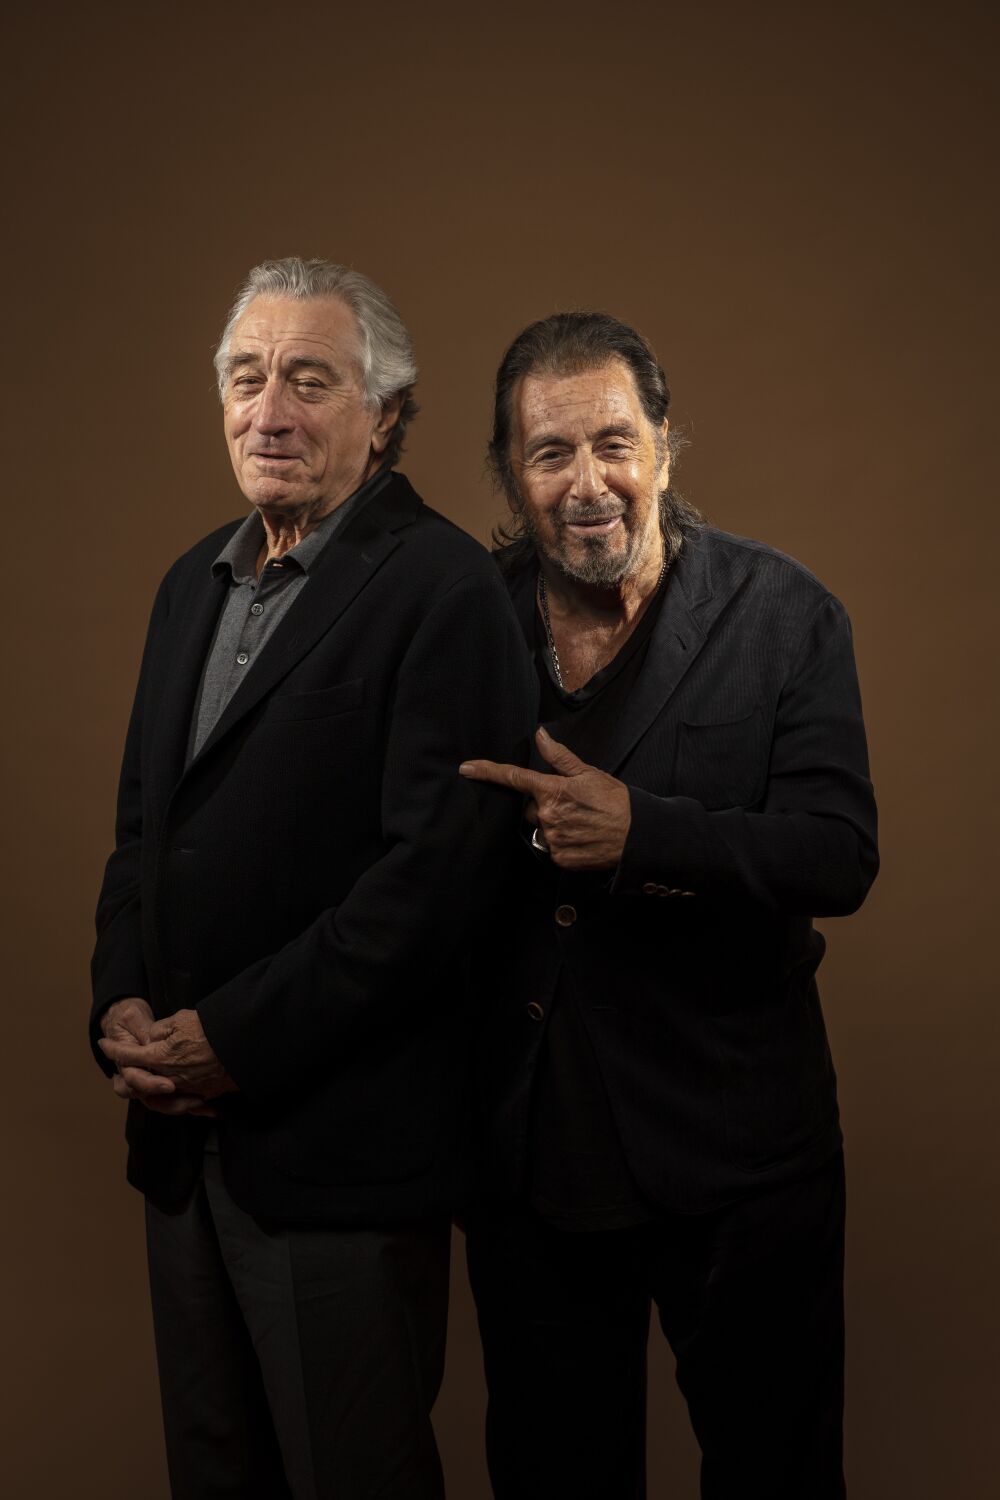 Robert De Niro, 79, weighs in on Al Pacino, 83, and his baby news: Hes older than me